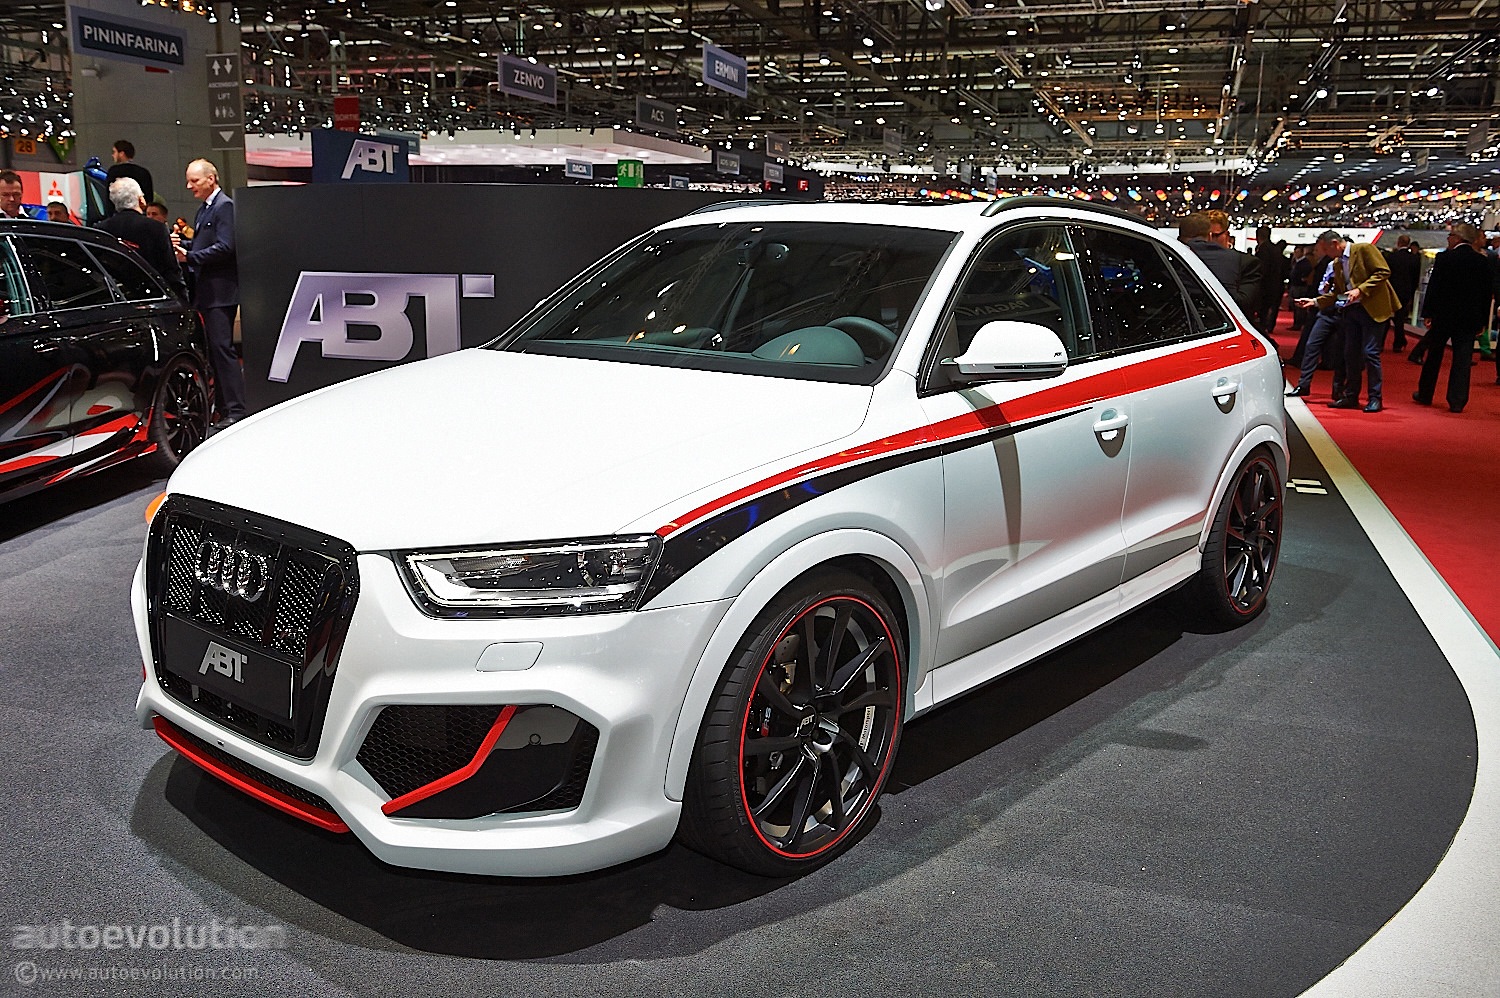 http://s1.cdn.autoevolution.com/images/news/gallery/abt-puts-power-back-into-25-tfsi-with-audi-rs-q3-tuning-project-live-photos_1.jpg?1394033343